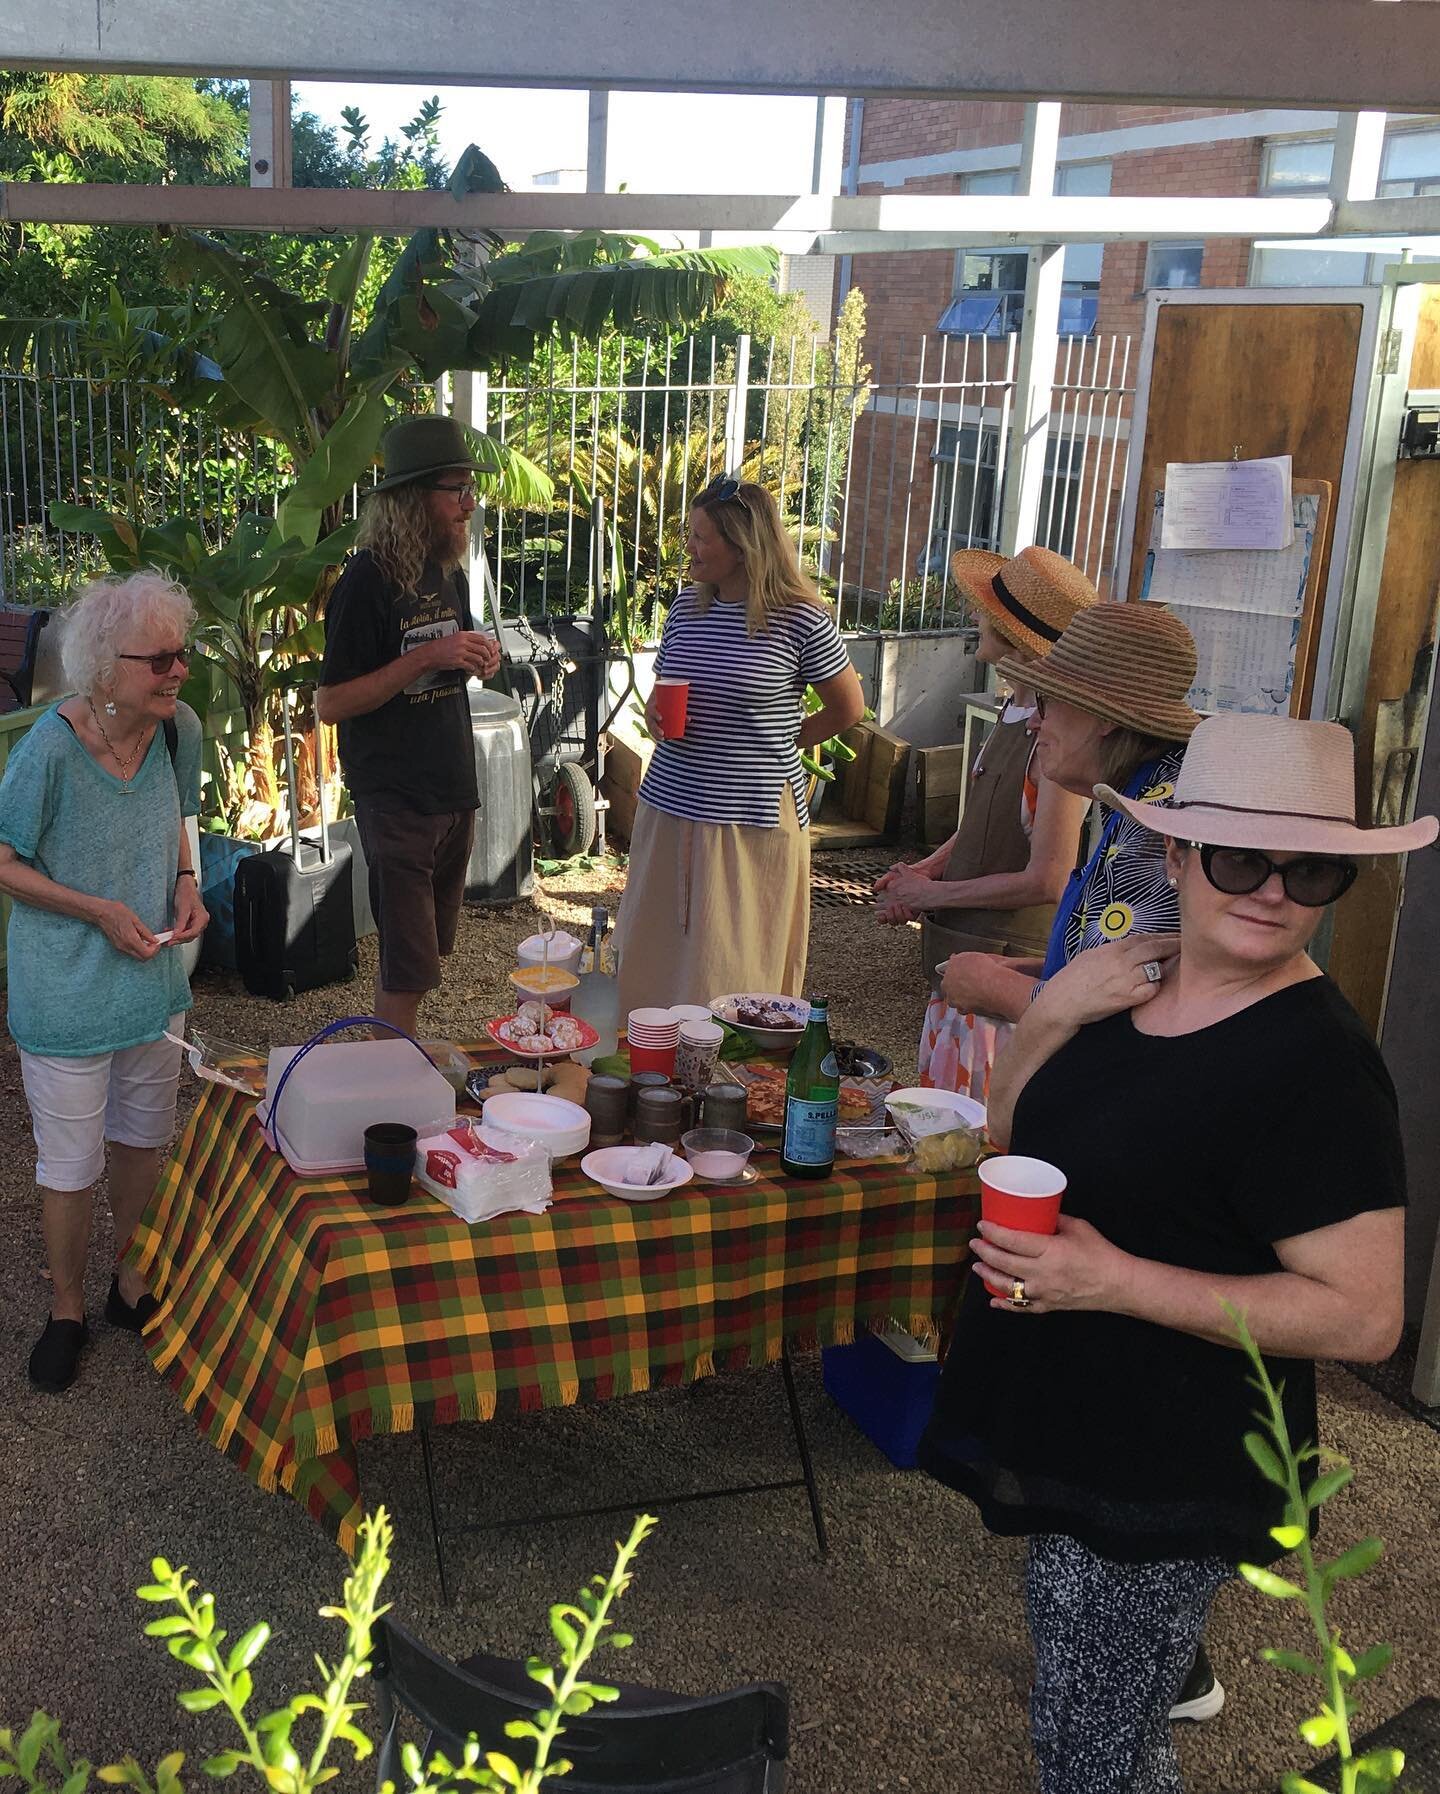 Sunday&rsquo;s open event-
thank you to everyone who came to enjoy our garden social event .
And thank you to all members who cooked, created &amp; shared delicious treats with the group.

It was great to meet new people &amp; to hear each specialty 